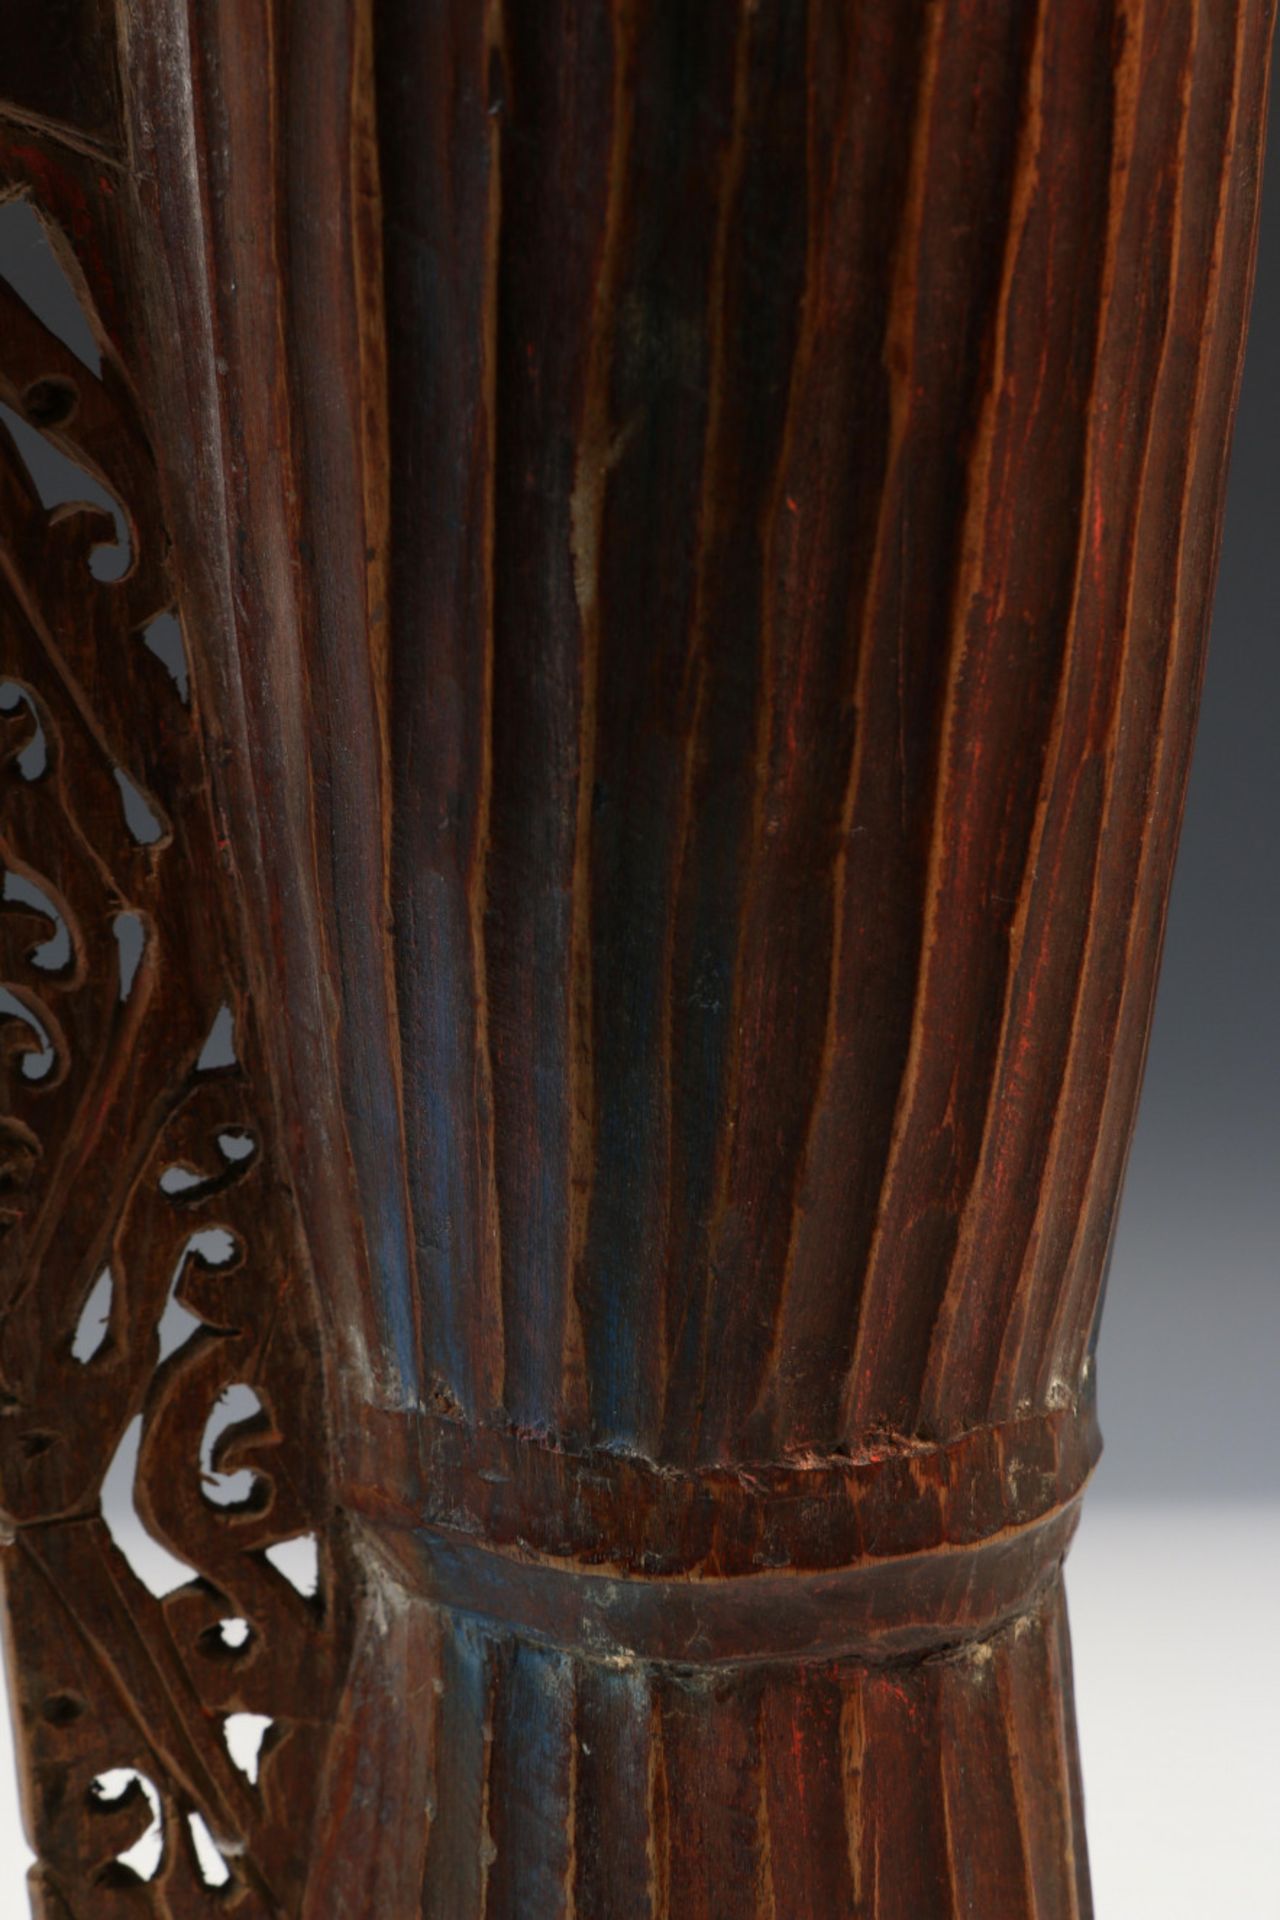 Papua, Cenderawasih Bay, drum, fluted, the handle on lower part openworked, tympanum missing - Image 4 of 7